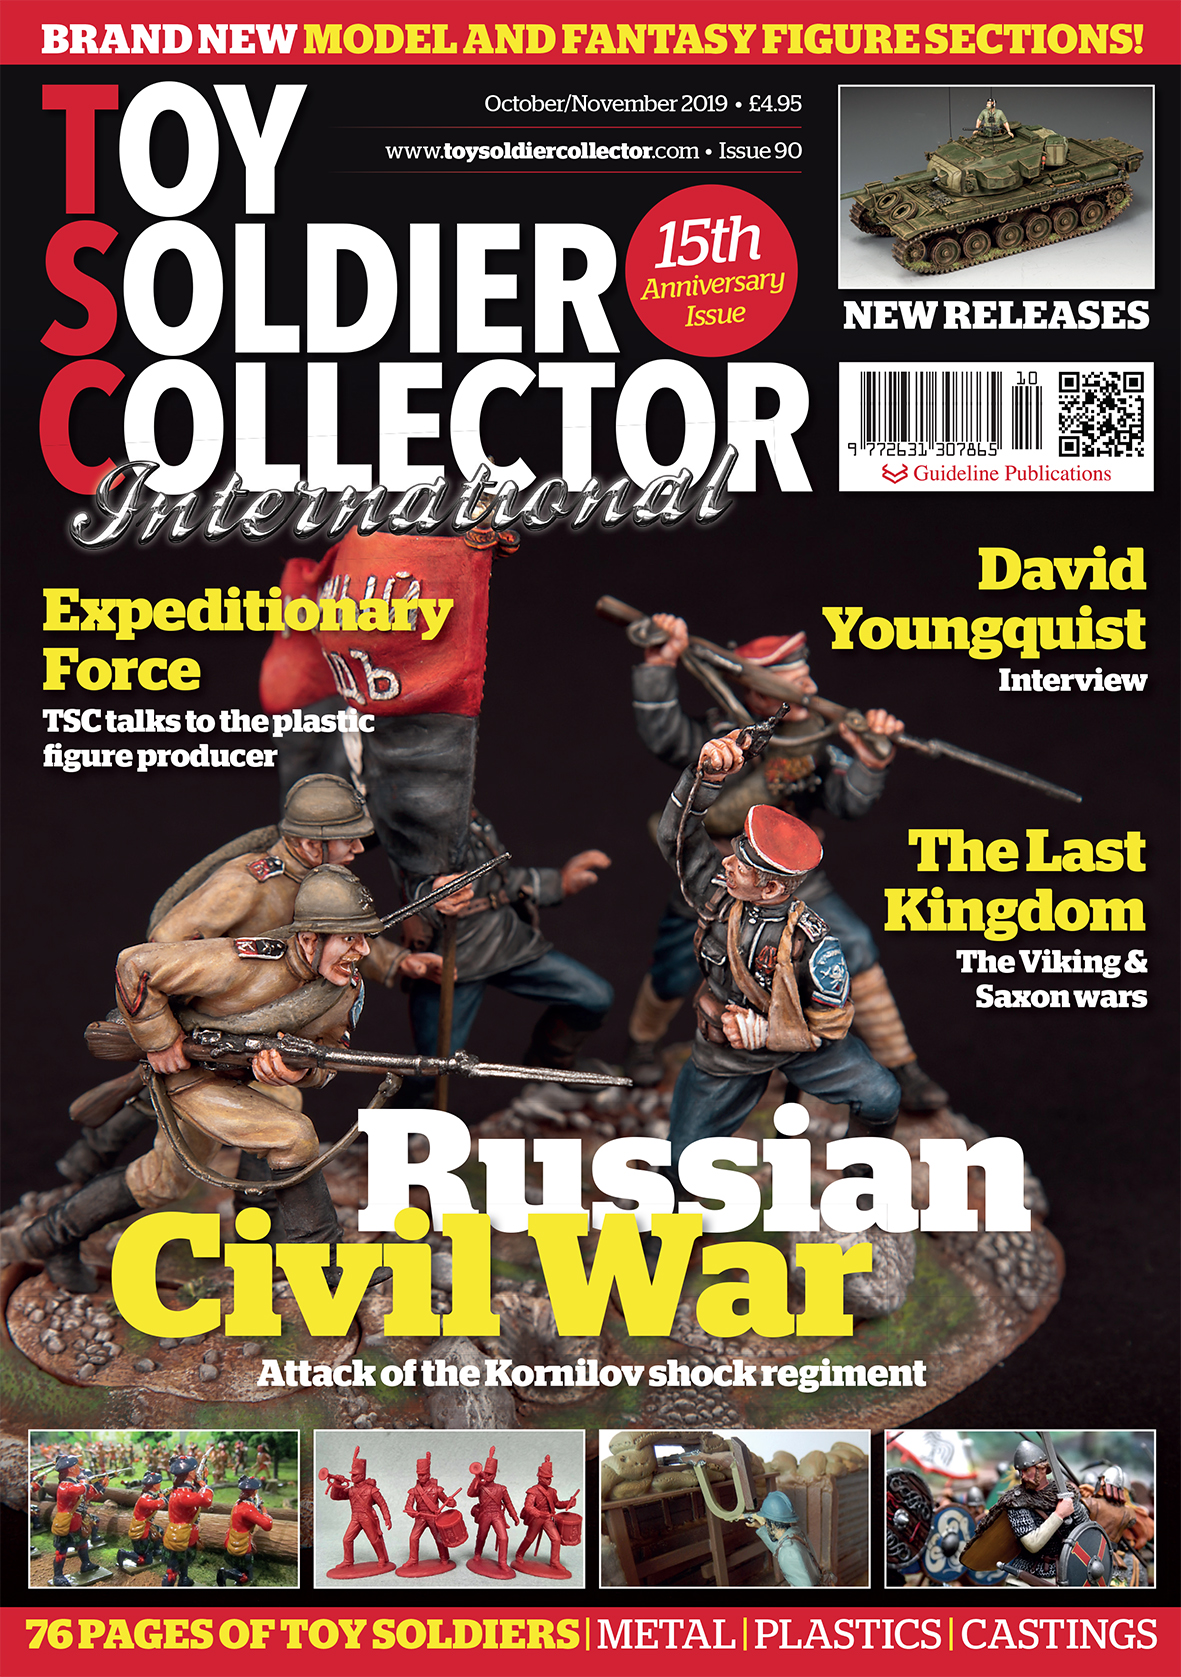 October & November 2015 Toy Soldier Collector Magazine 66 